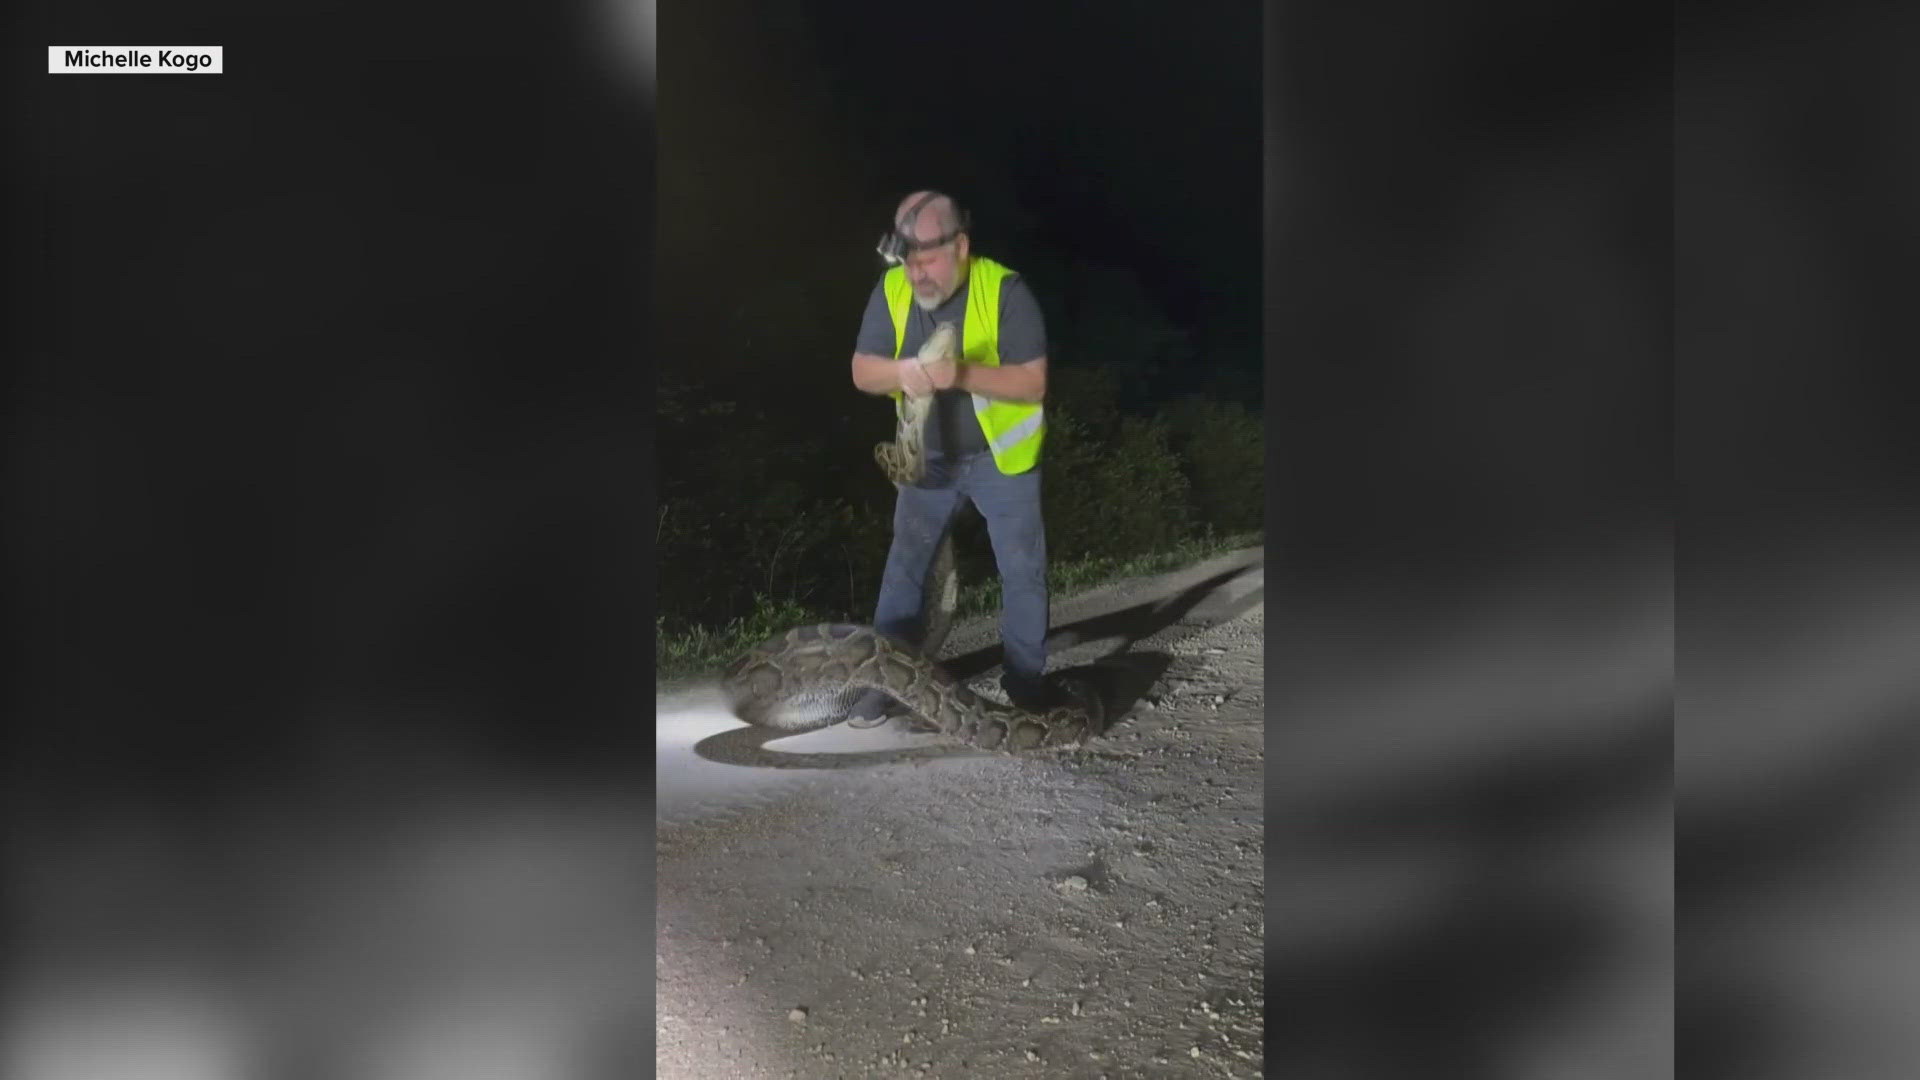 The man is a python hunter and grabbed the huge snake with his bare hands in true "Florida man" fashion.